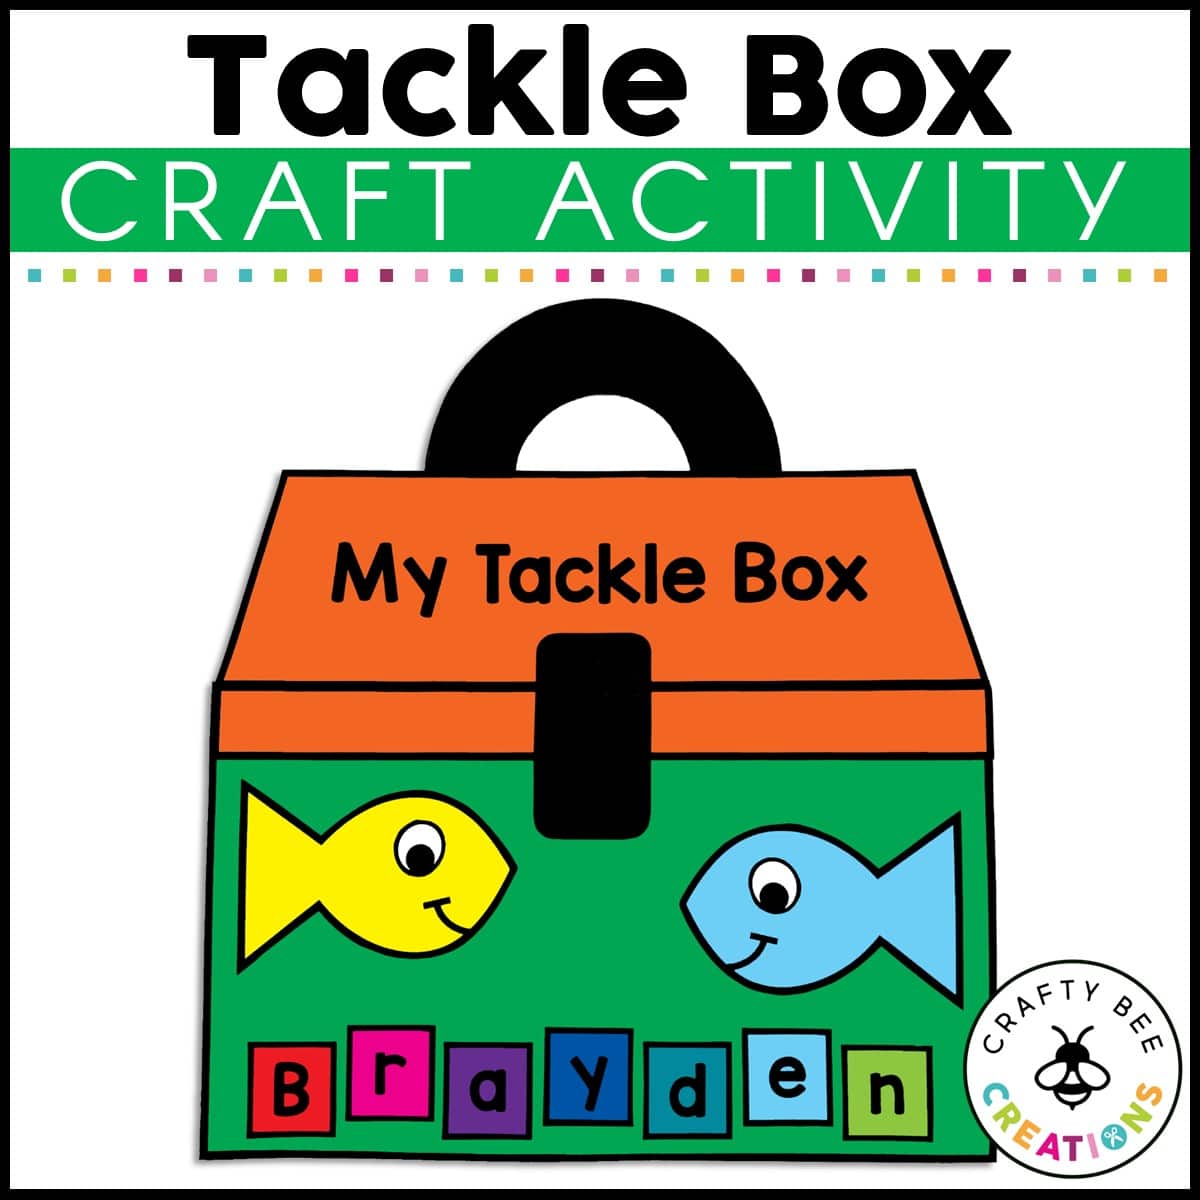 art tackle box. Clever idea for carrying it all together!